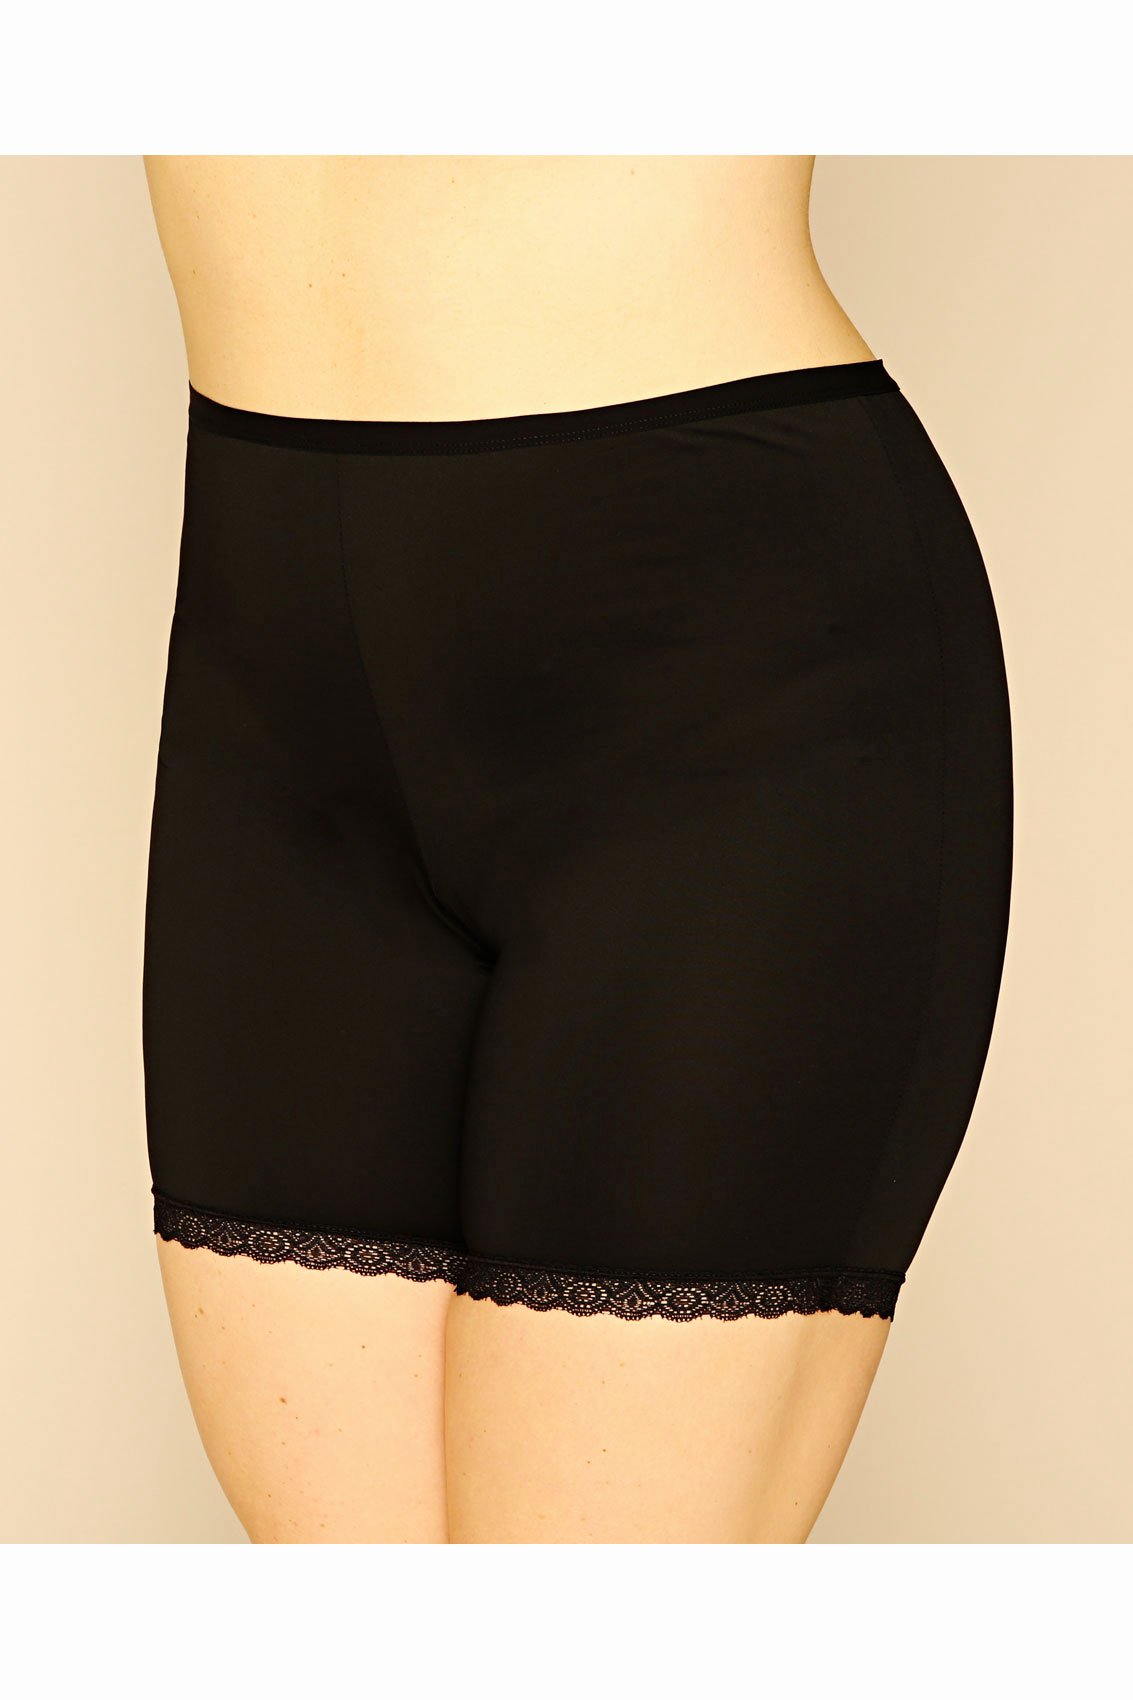 Like Us On Facebook Template New Black Thigh Smoother Brief with Lace Detail Hem Plus Size 14 to 36